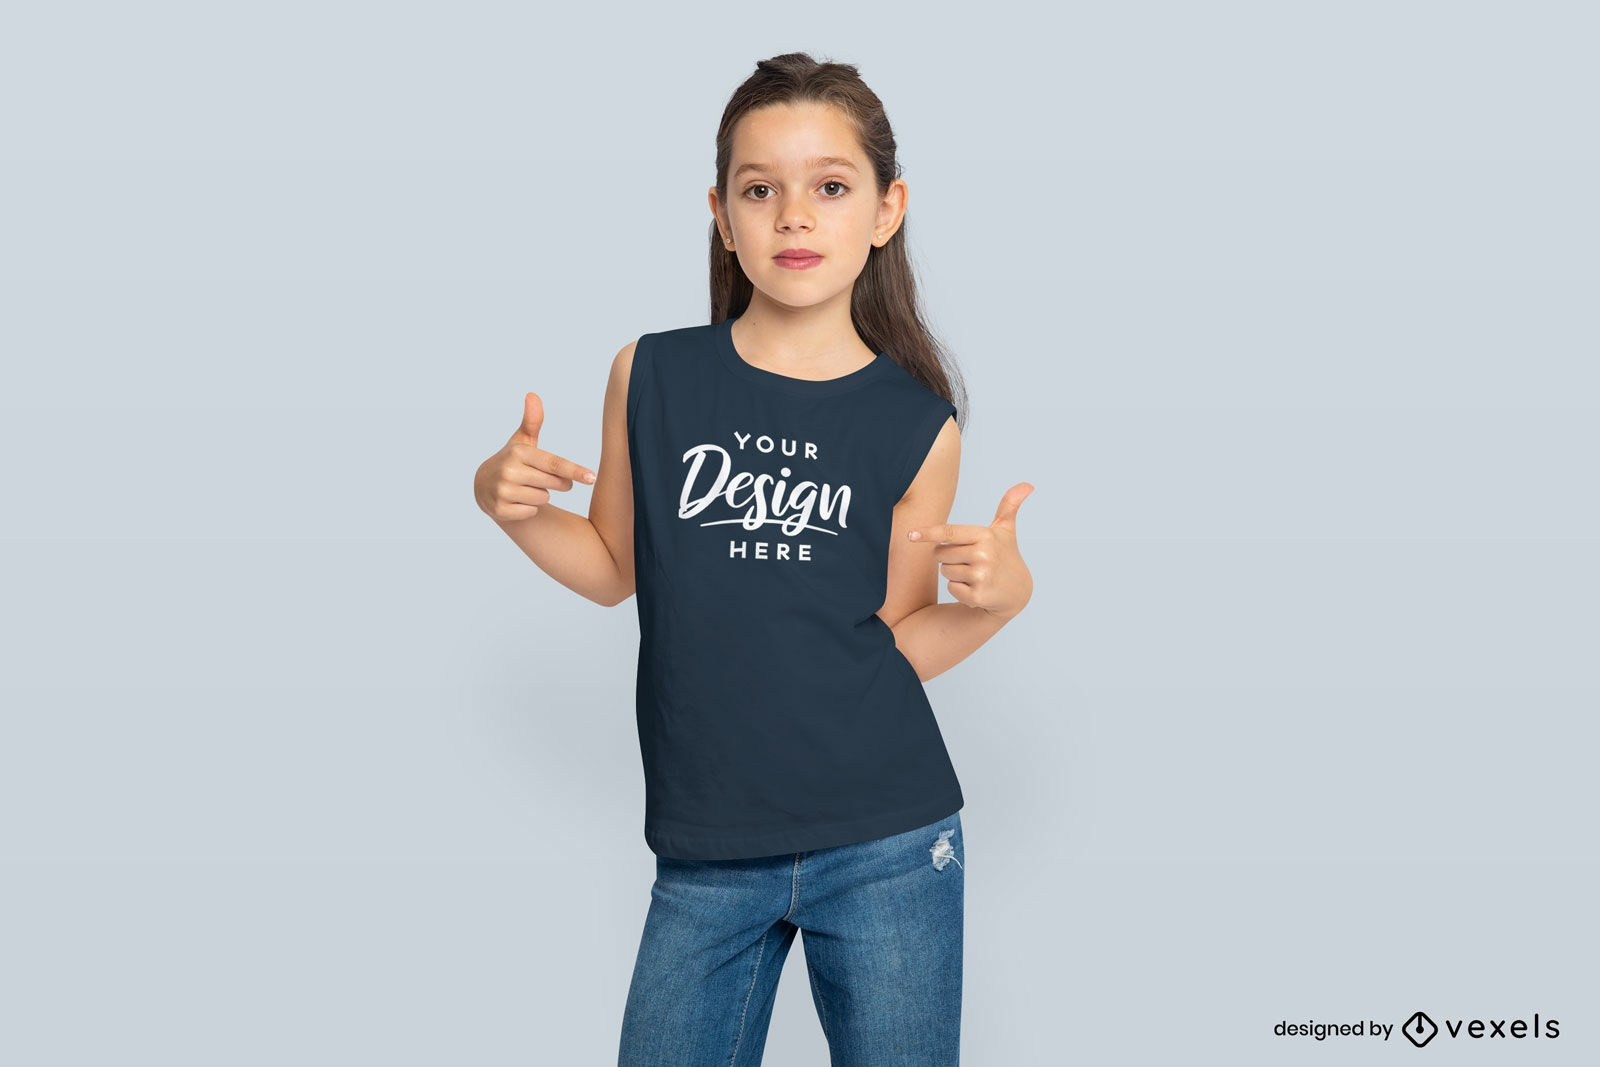 Girl pointing to tank top t-shirt mockup